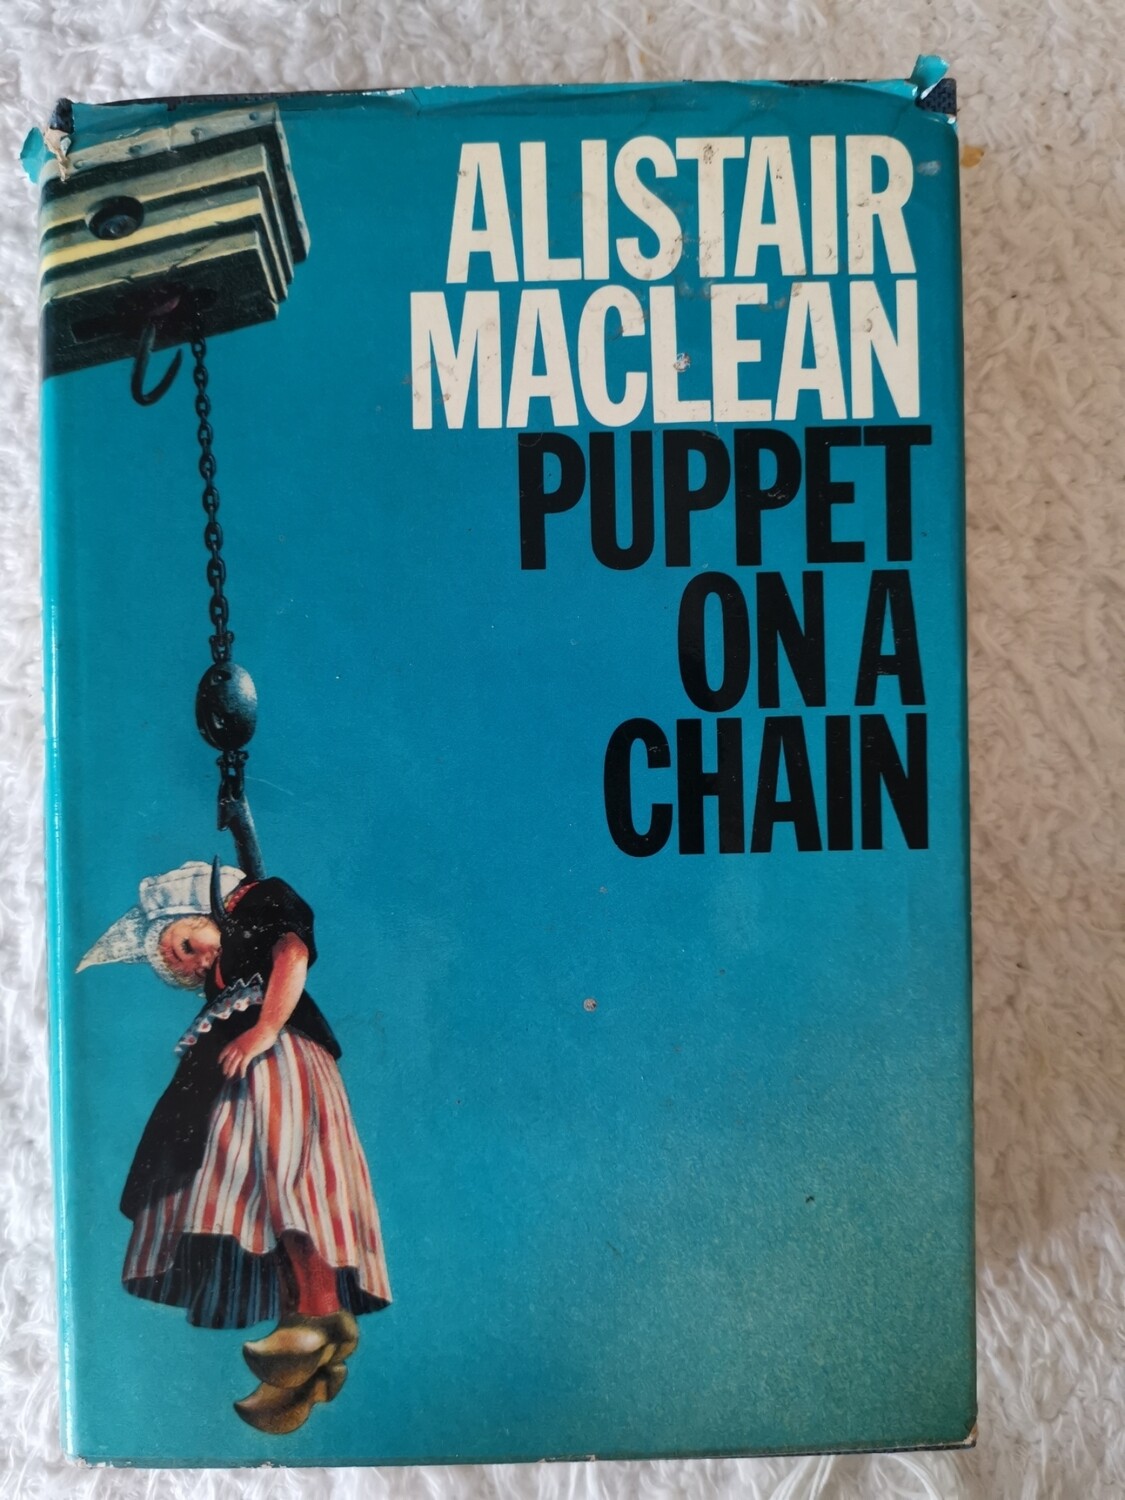 Puppet on a chain, Alistair Maclean